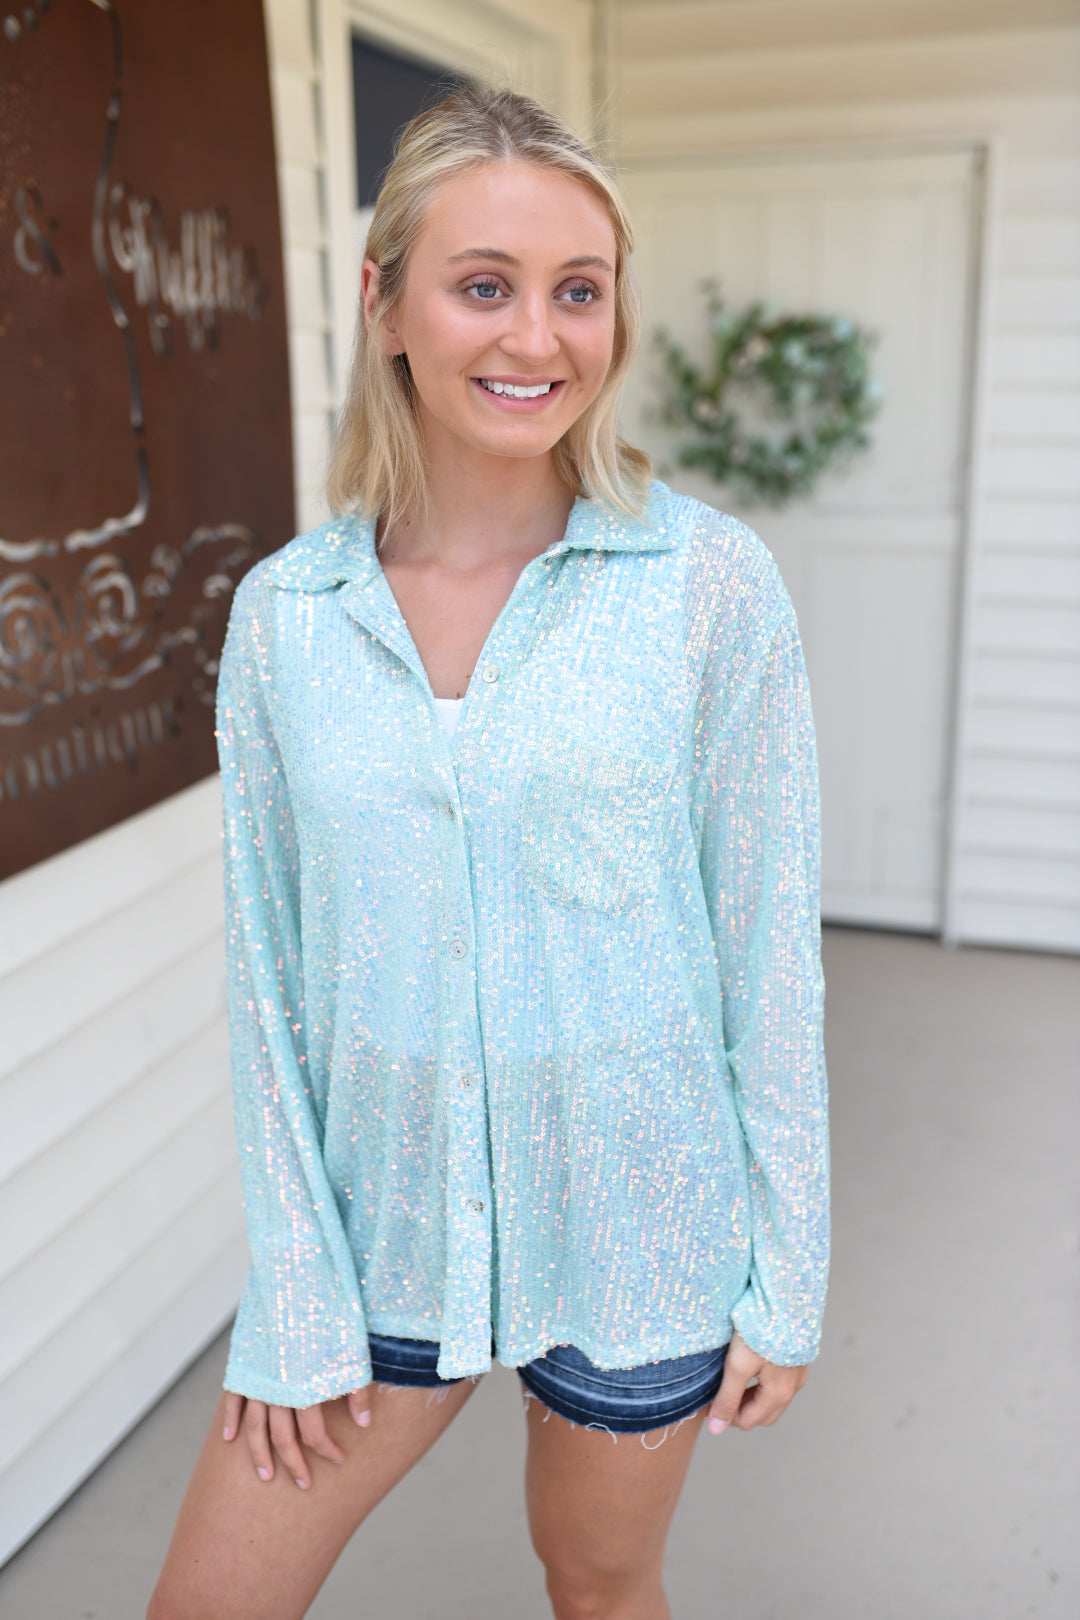 My Mermaid Sequin Button Down Top